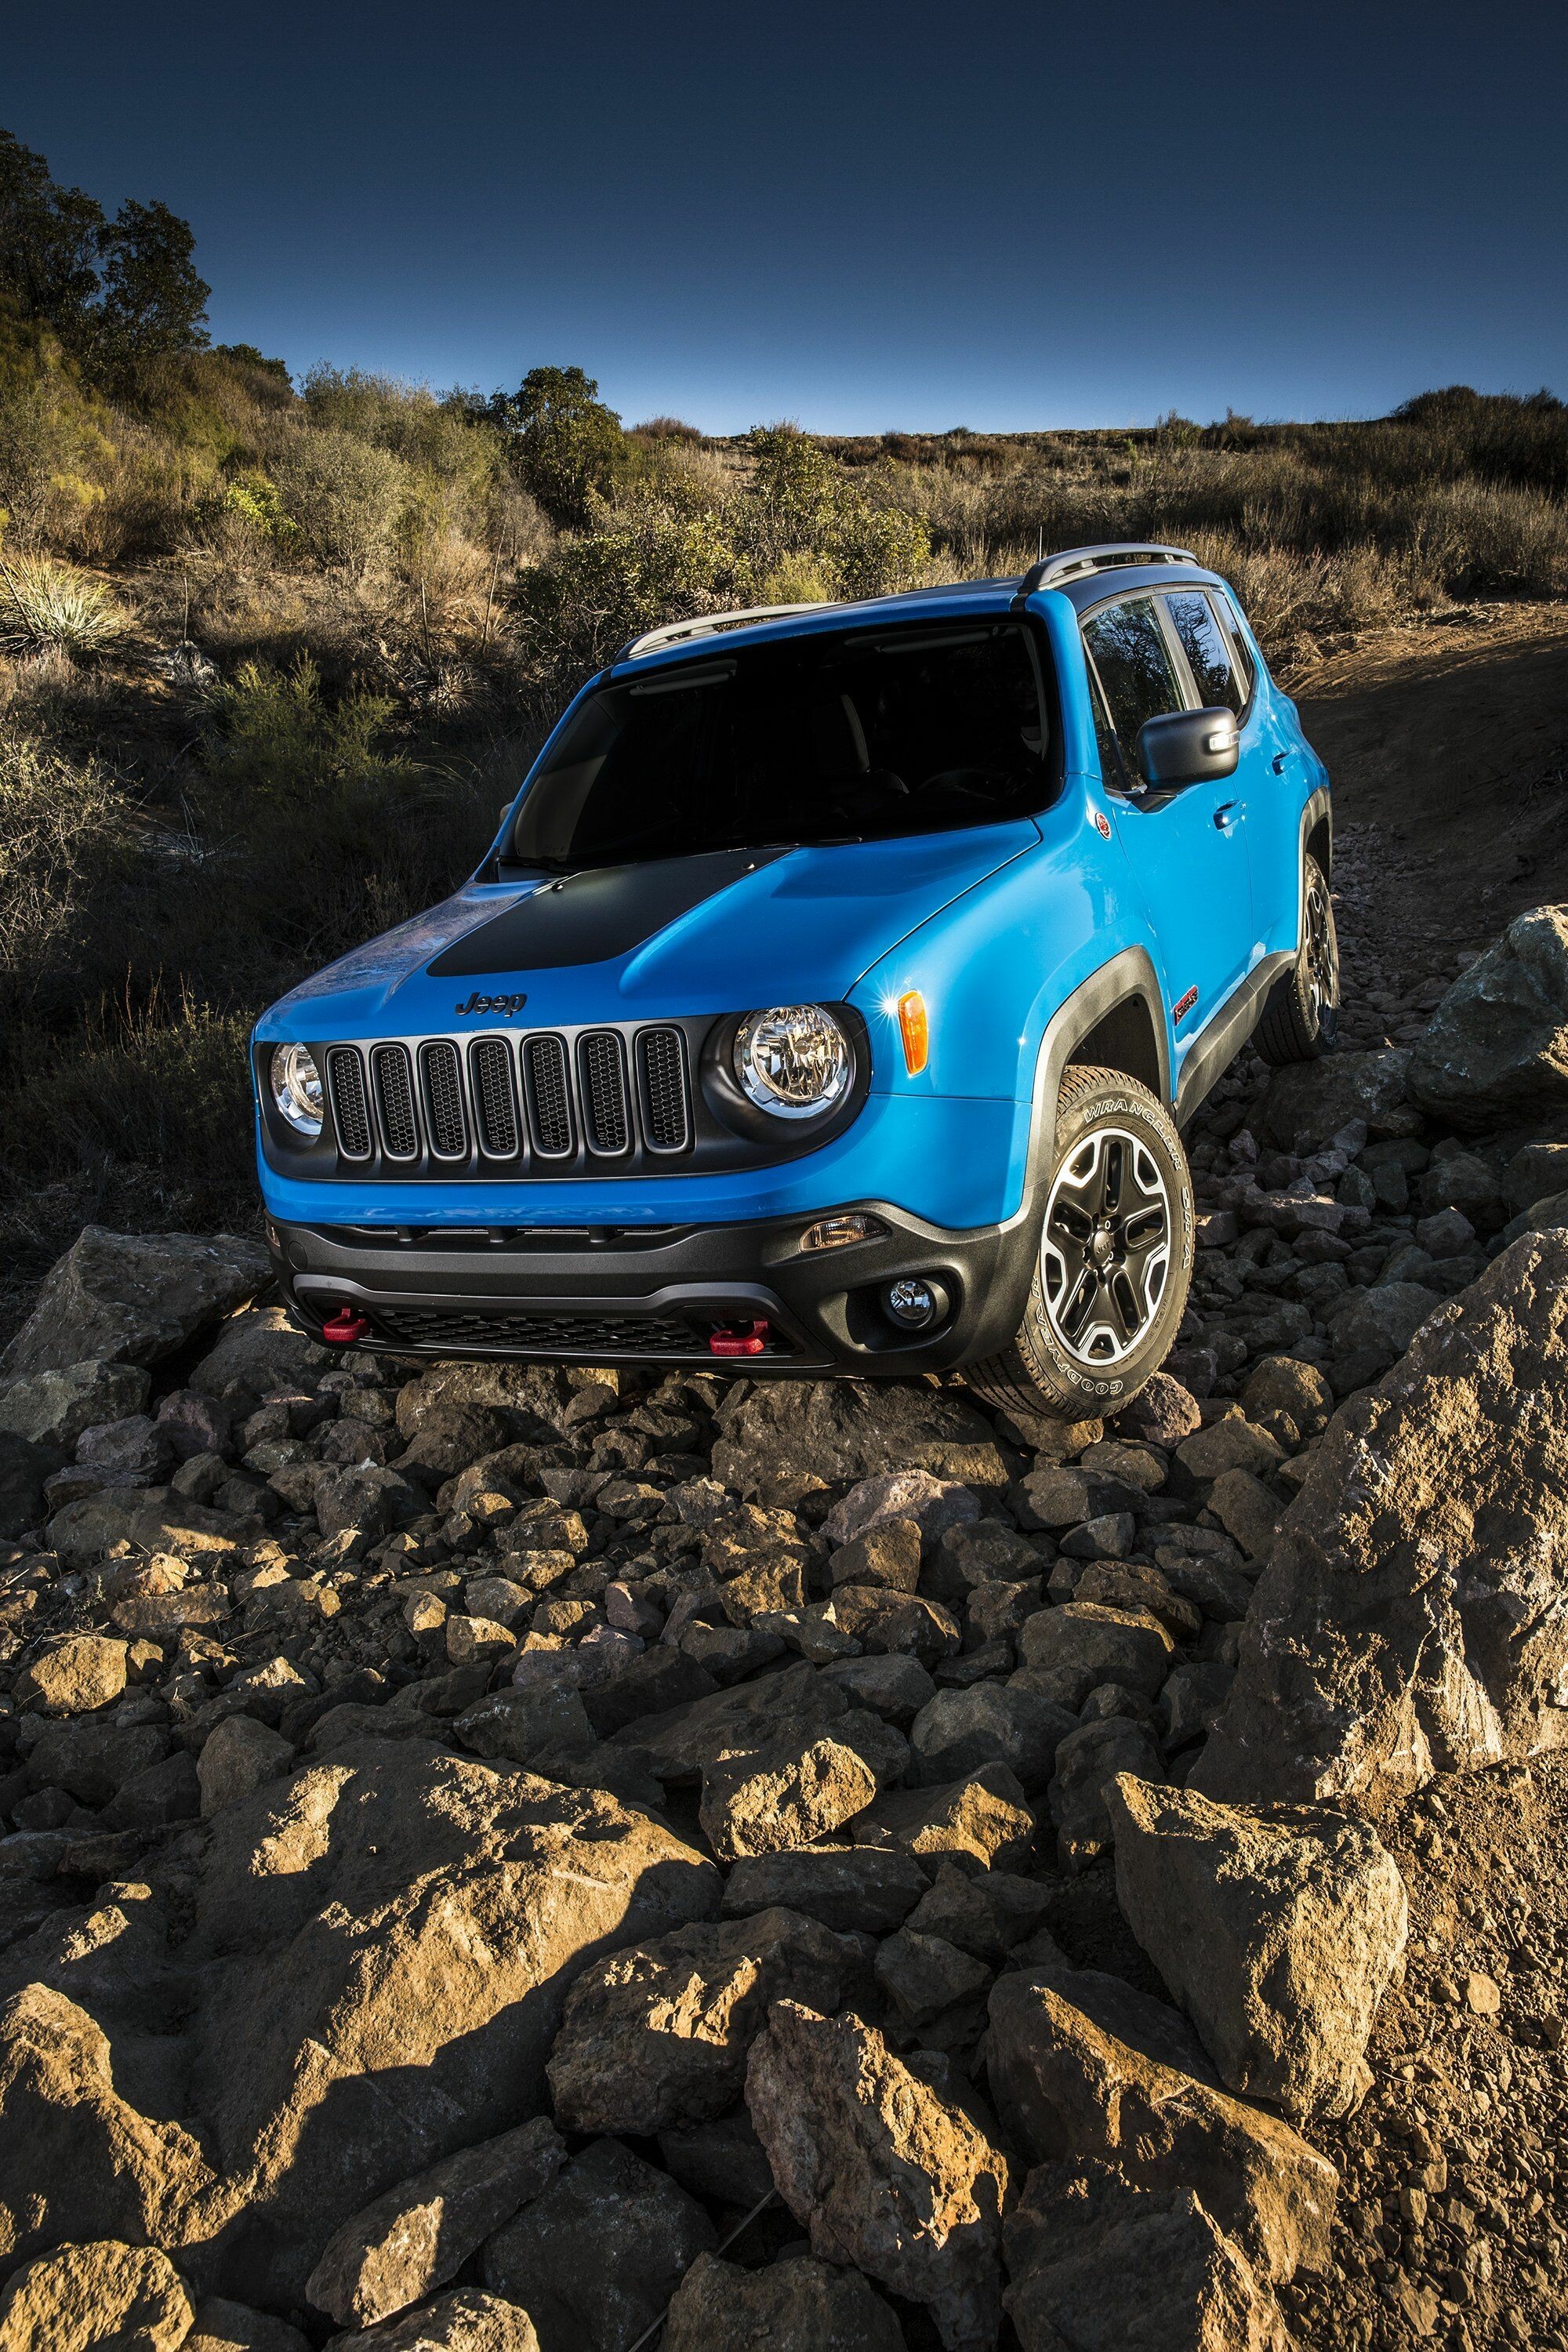 Jeep: Renegade, A 160-horsepower, turbocharged 1.4-liter four-cylinder engine, A six-speed manual transmission. 2000x3000 HD Background.